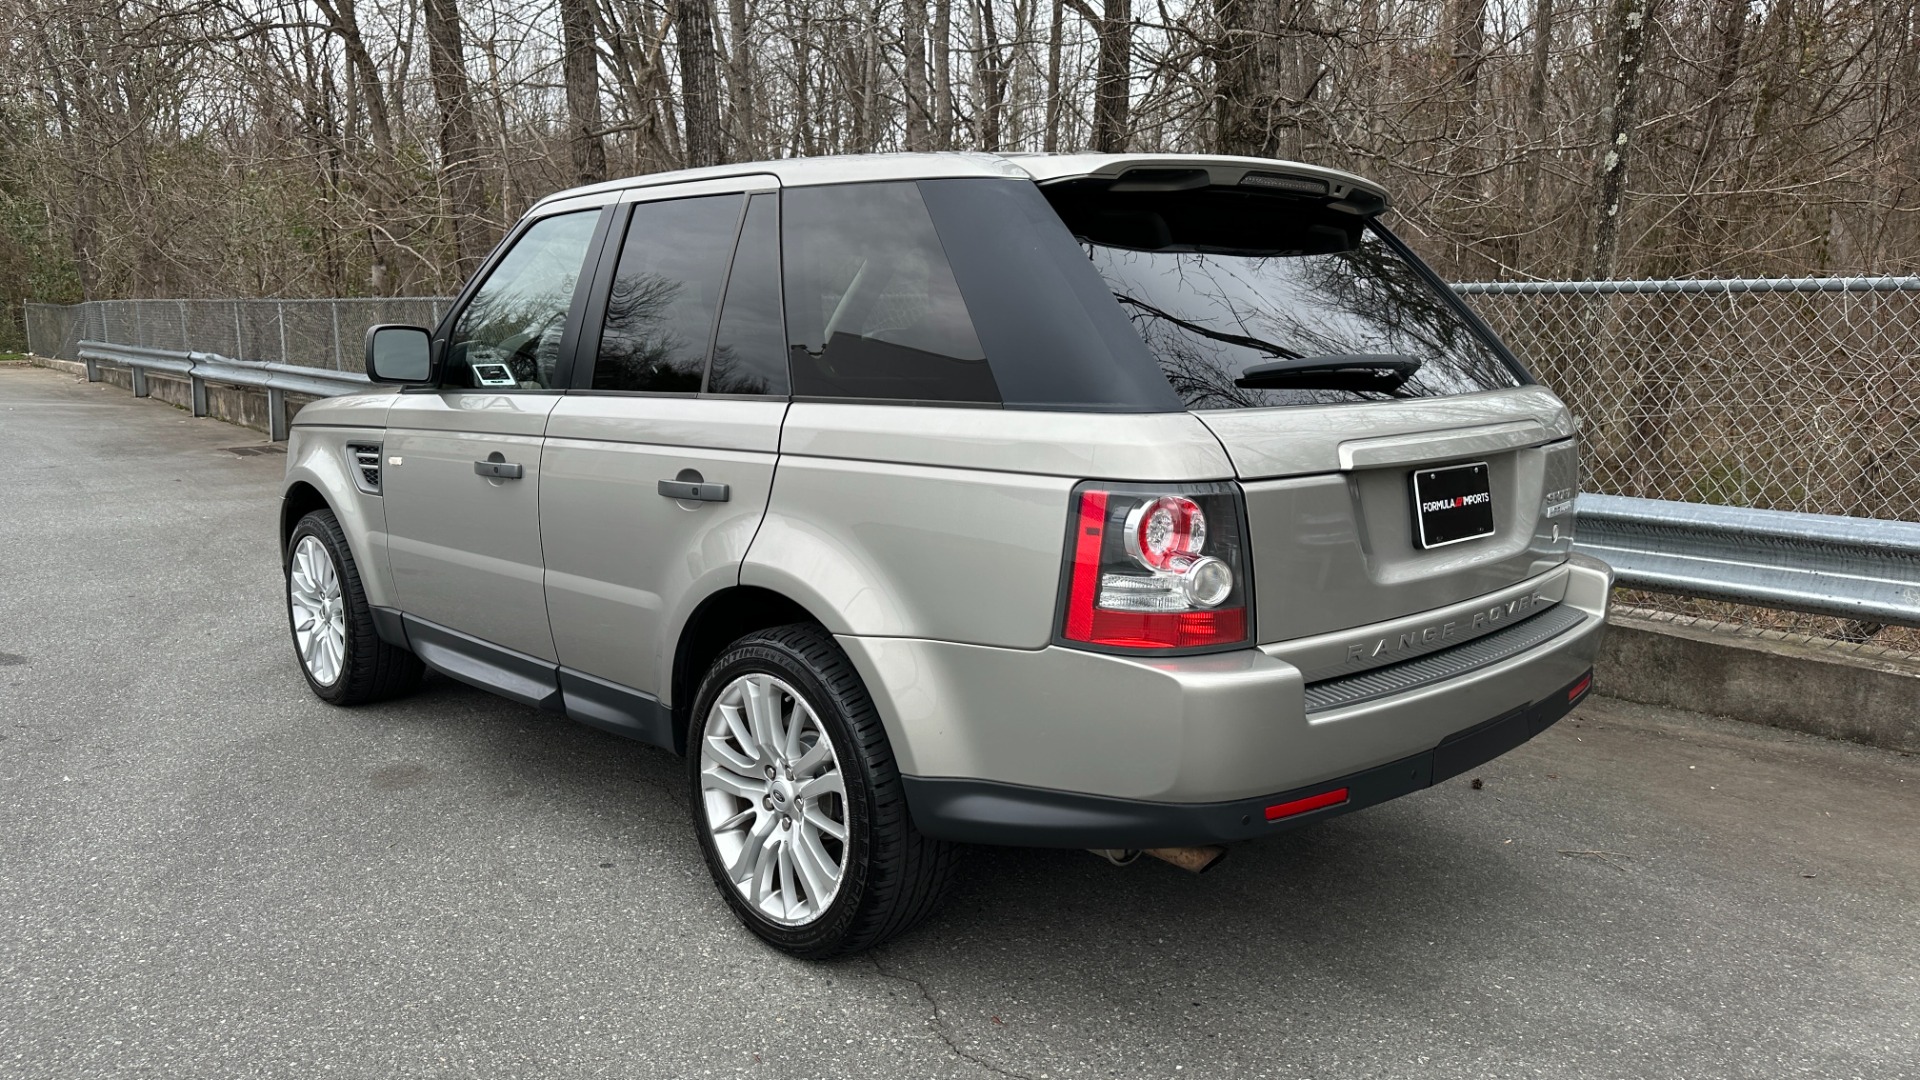 Used 2011 Land Rover Range Rover Sport HSE LUX / LEATHER / WOOD TRIM / LUXURY INTERIOR PKG / DIGITAL AND SAT RADIO for sale Sold at Formula Imports in Charlotte NC 28227 4